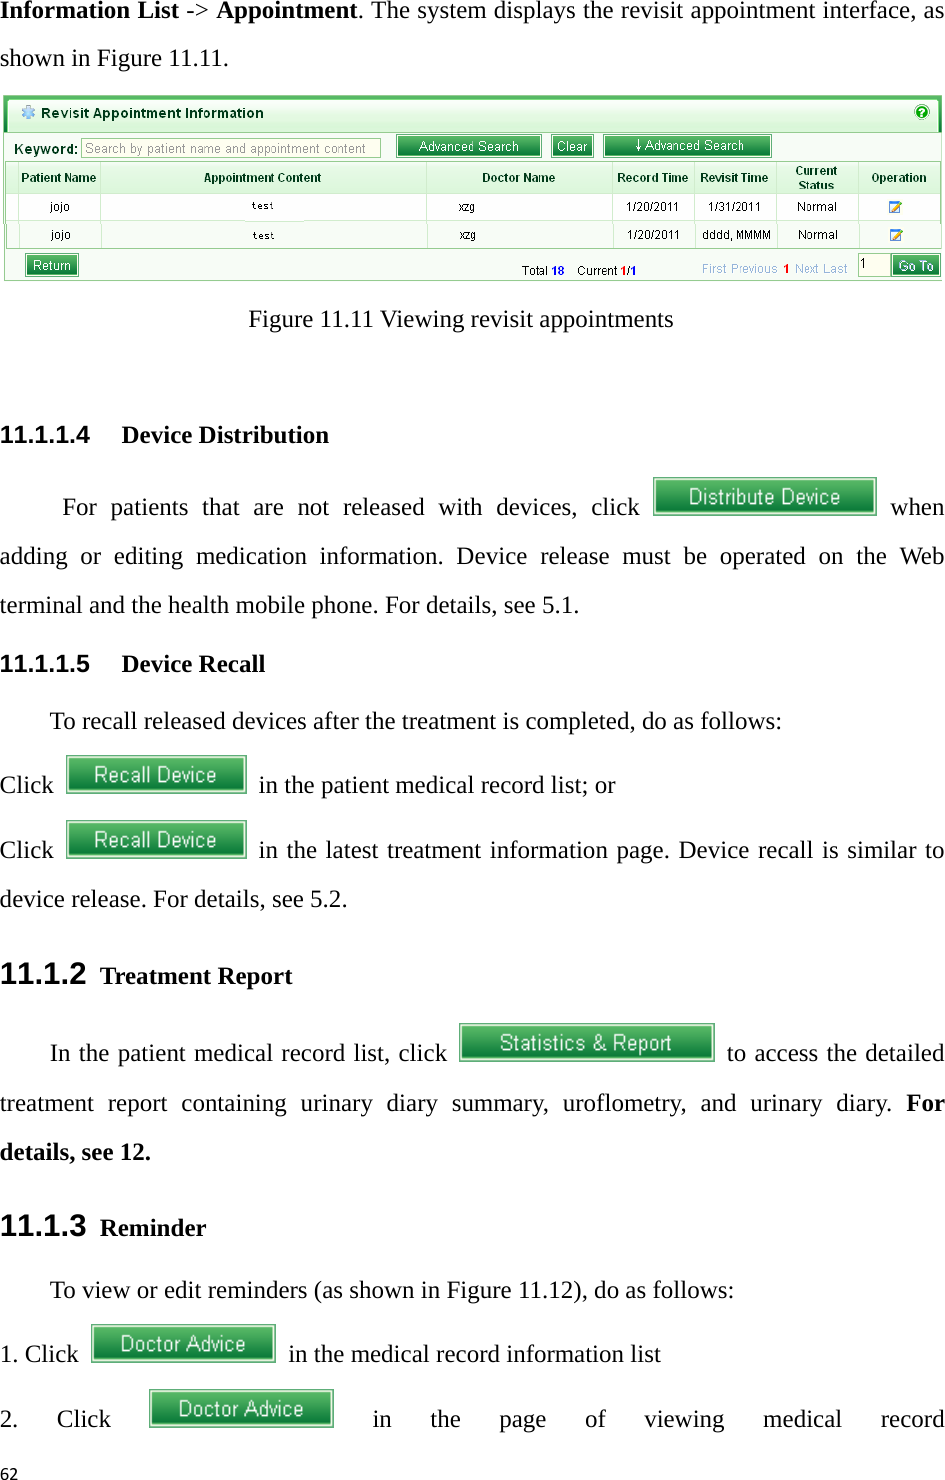 62Information List -&gt; Appointment. The system displays the revisit appointment interface, as shown in Figure 11.11.    Figure 11.11 Viewing revisit appointments  11.1.1.4   Device Distribution For patients that are not released with devices, click   when adding or editing medication information. Device release must be operated on the Web terminal and the health mobile phone. For details, see 5.1. 11.1.1.5   Device Recall To recall released devices after the treatment is completed, do as follows: Click    in the patient medical record list; or   Click    in the latest treatment information page. Device recall is similar to device release. For details, see 5.2.   11.1.2  Treatment Report     In the patient medical record list, click    to access the detailed treatment report containing urinary diary summary, uroflometry, and urinary diary. For details, see 12.   11.1.3  Reminder To view or edit reminders (as shown in Figure 11.12), do as follows: 1. Click    in the medical record information list 2. Click   in the page of viewing medical record 